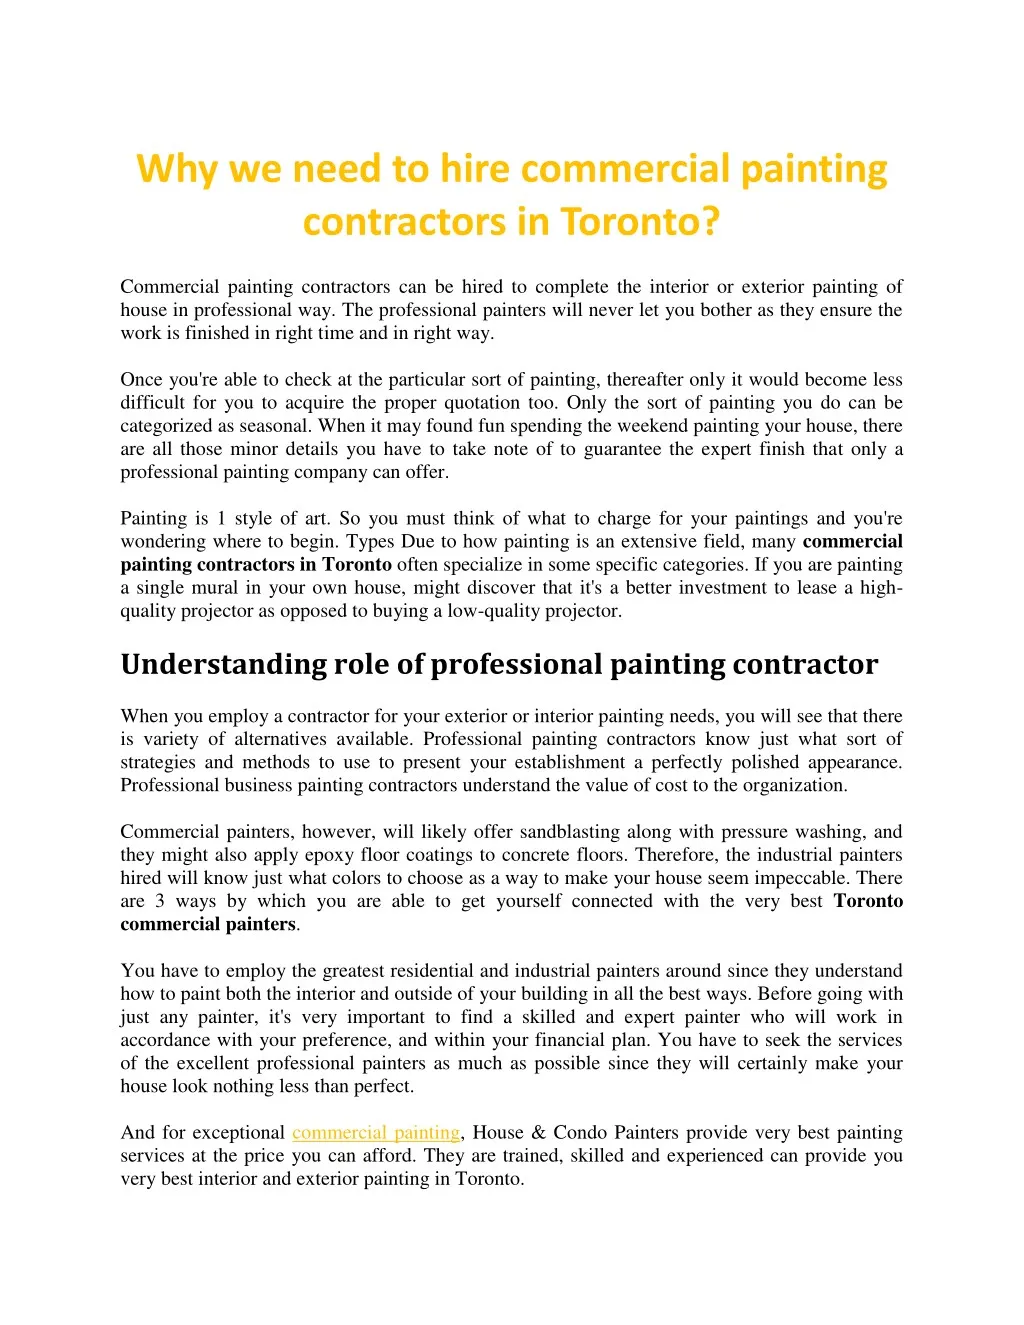 Ppt Why We Need To Hire Commercial Painting Contractors In